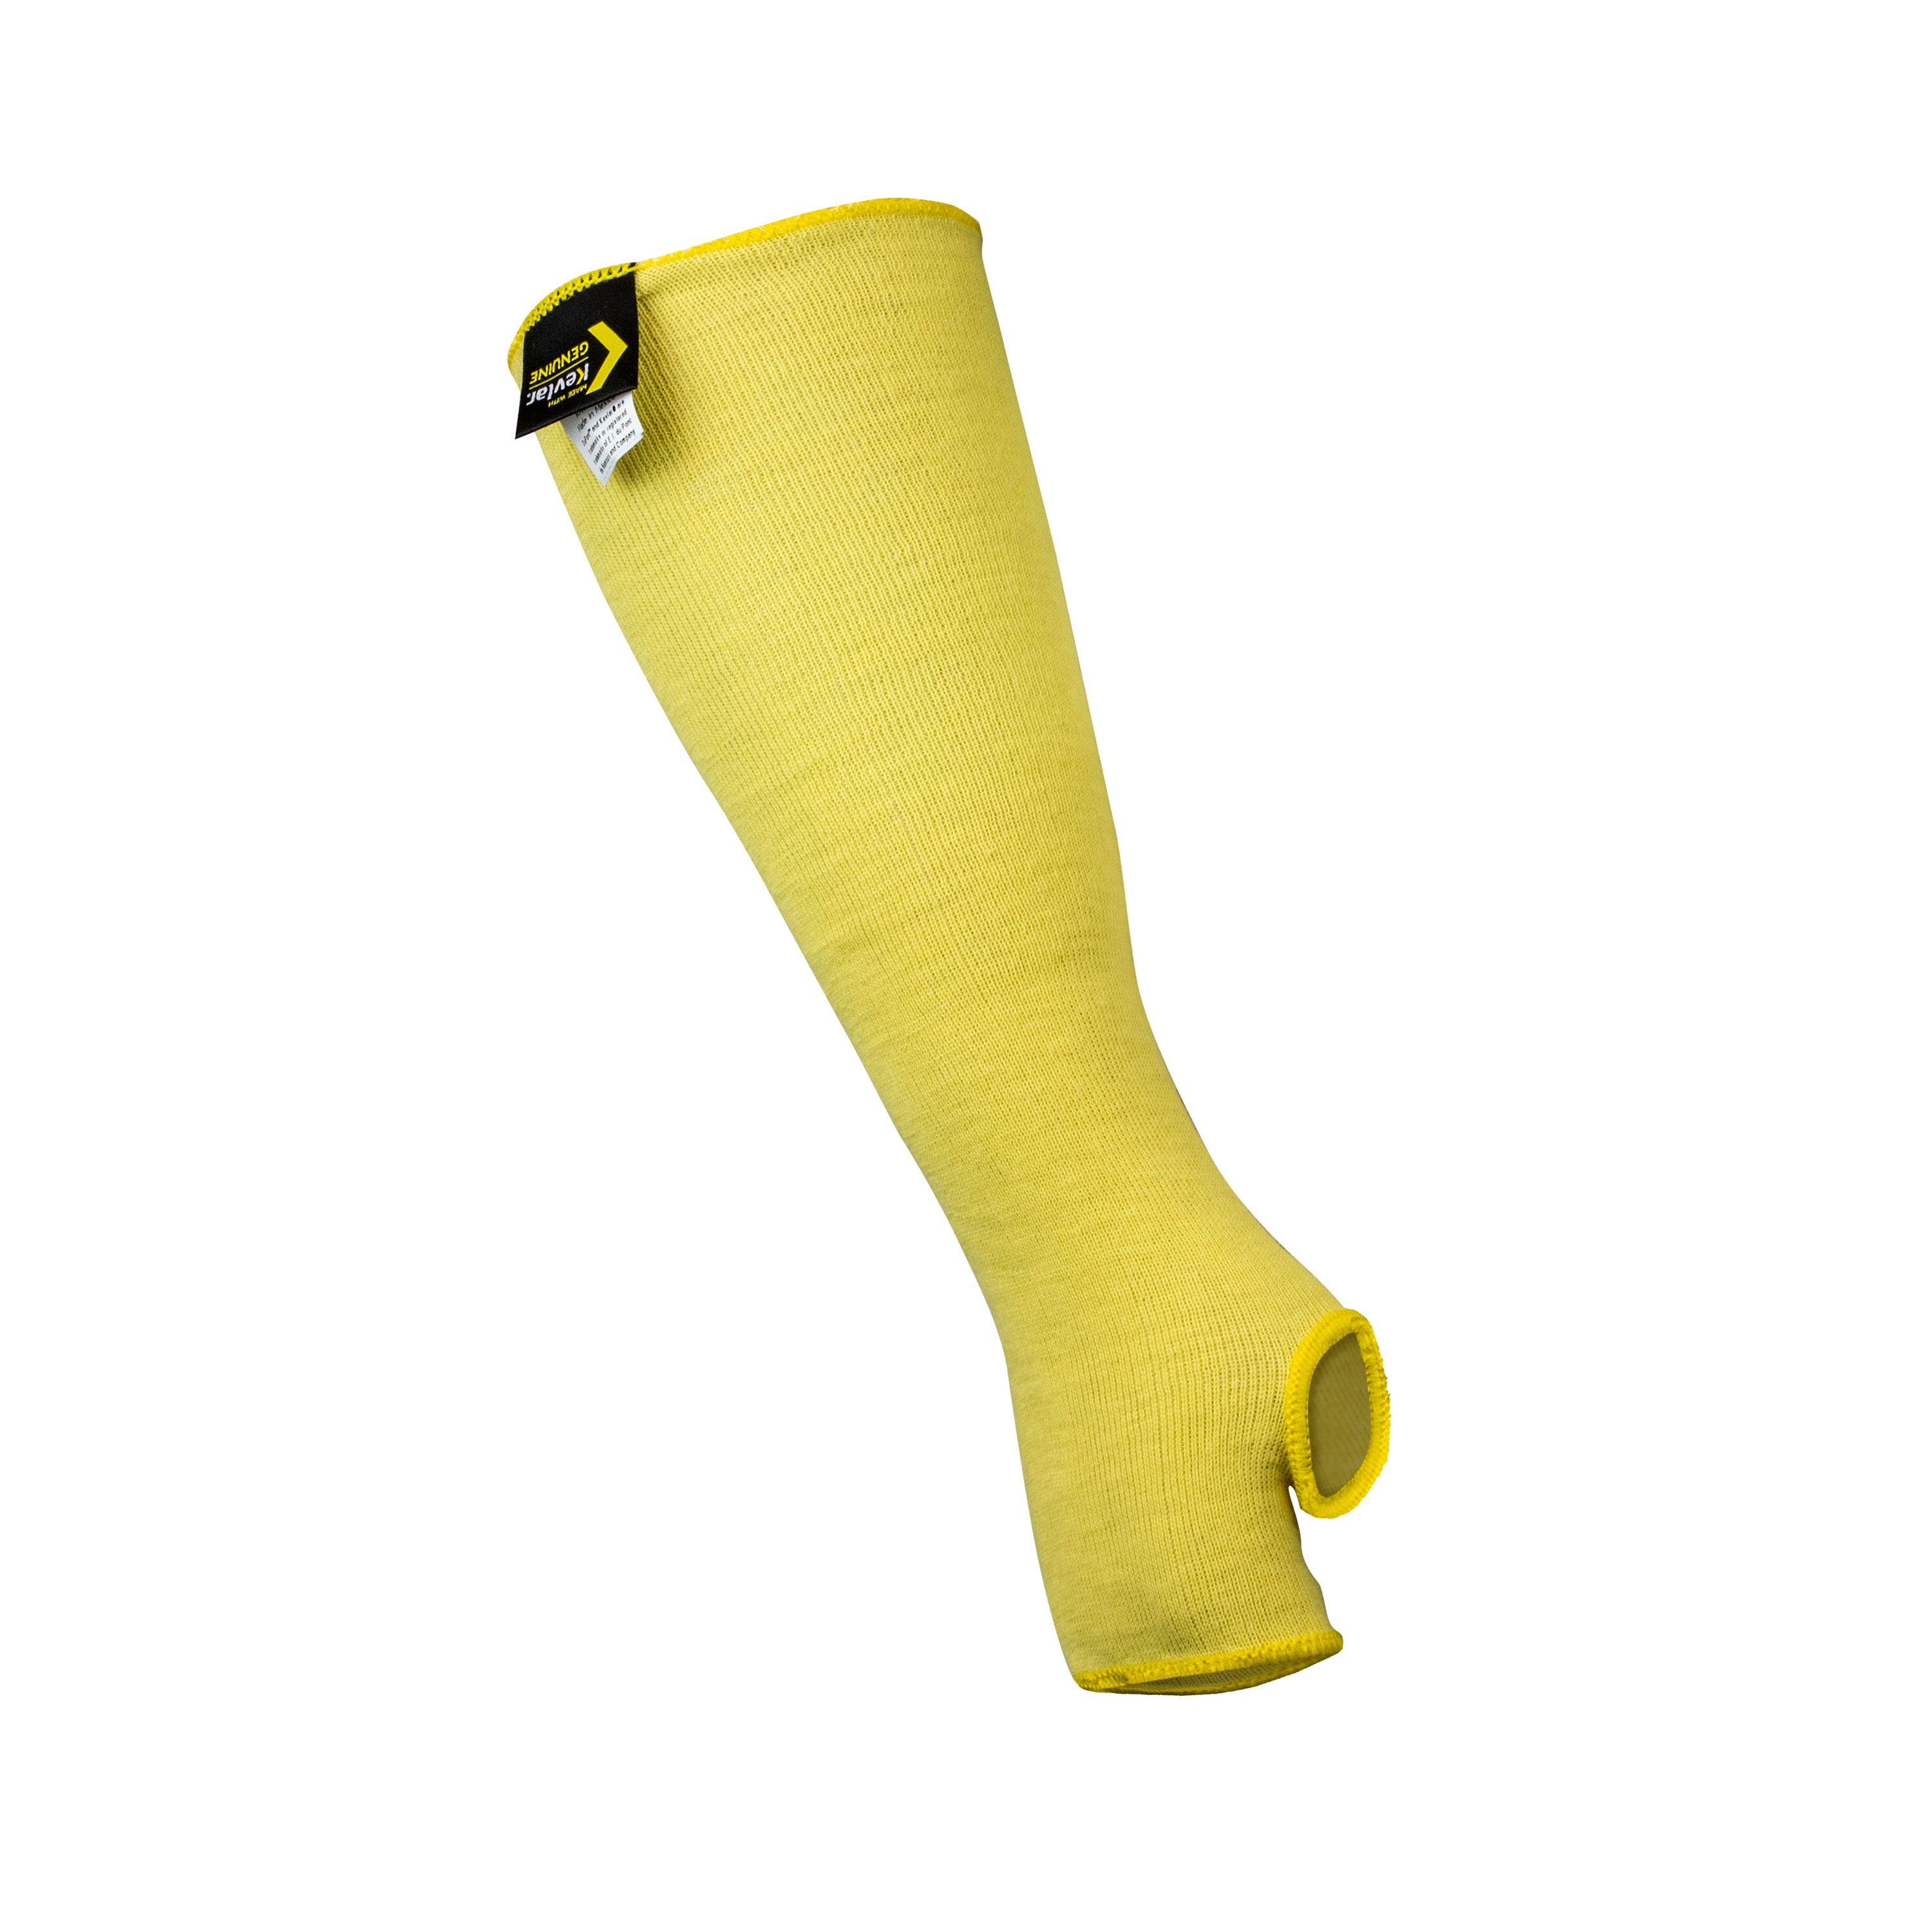 cut resistant safety socks, cut resistant safety socks Suppliers and  Manufacturers at